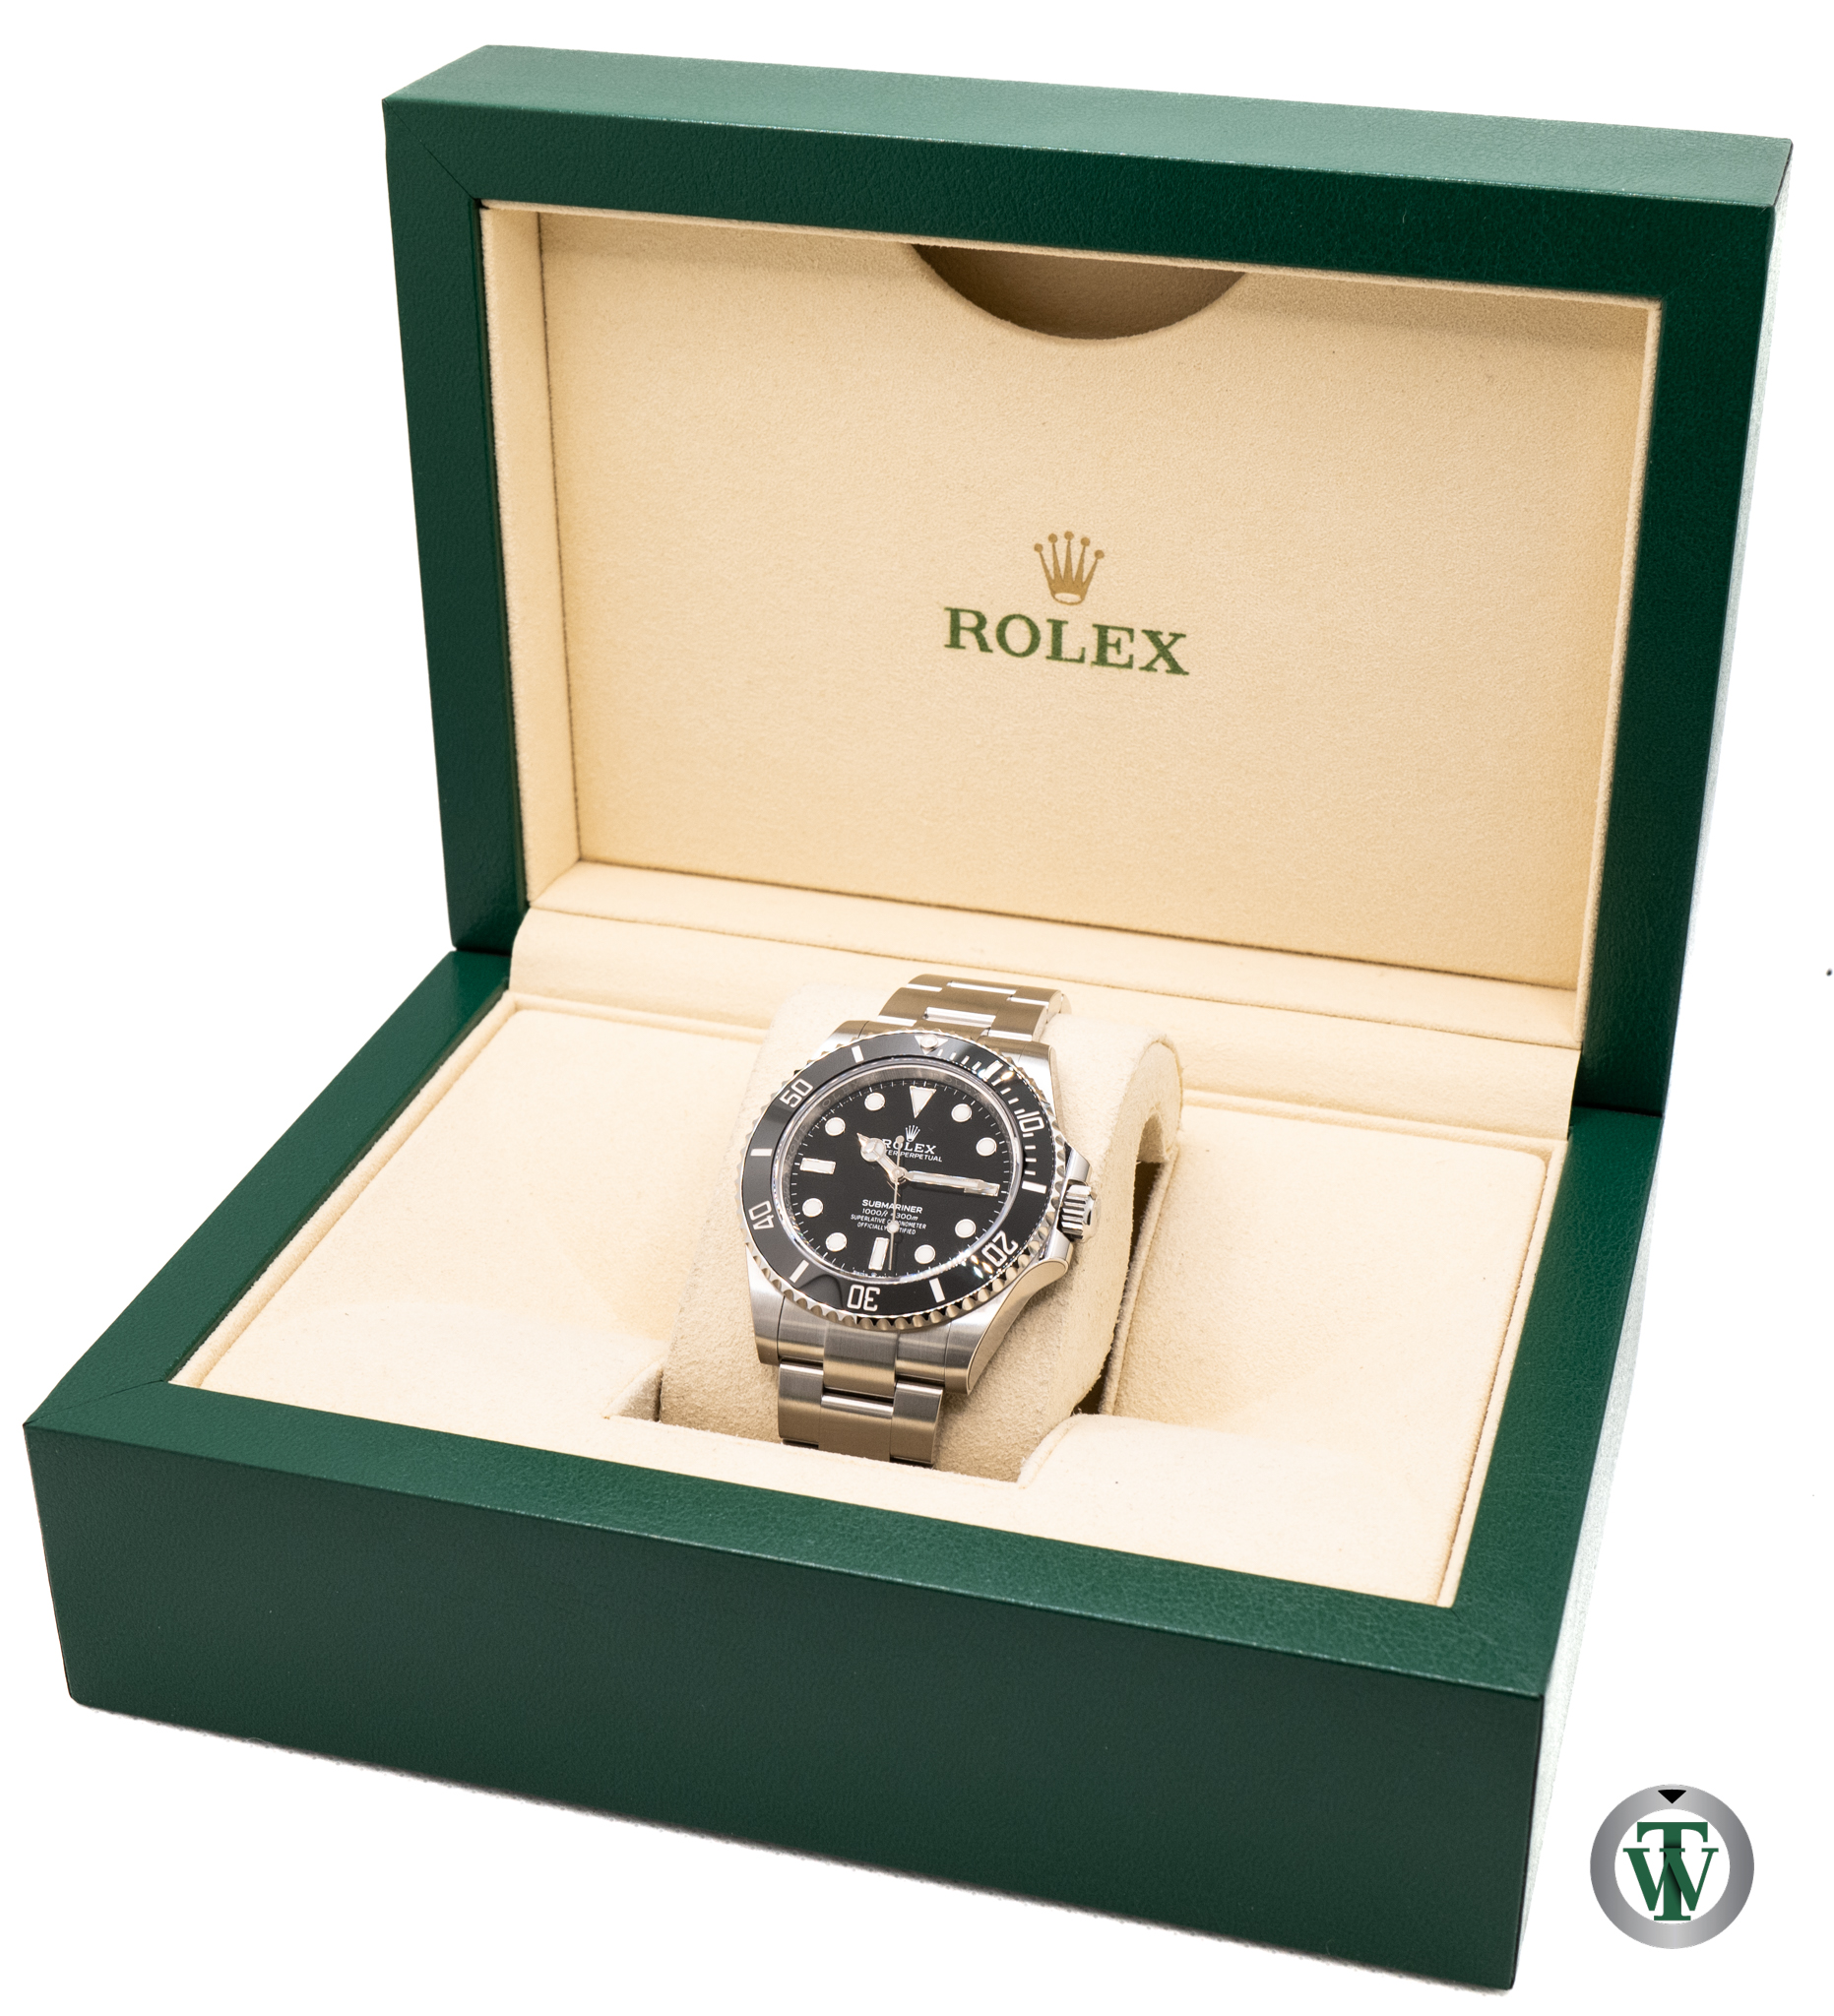 Rolex •in Stock•Submariner•Date•Starbucks•NEW 2022• for $22,719 for sale  from a Trusted Seller on Chrono24